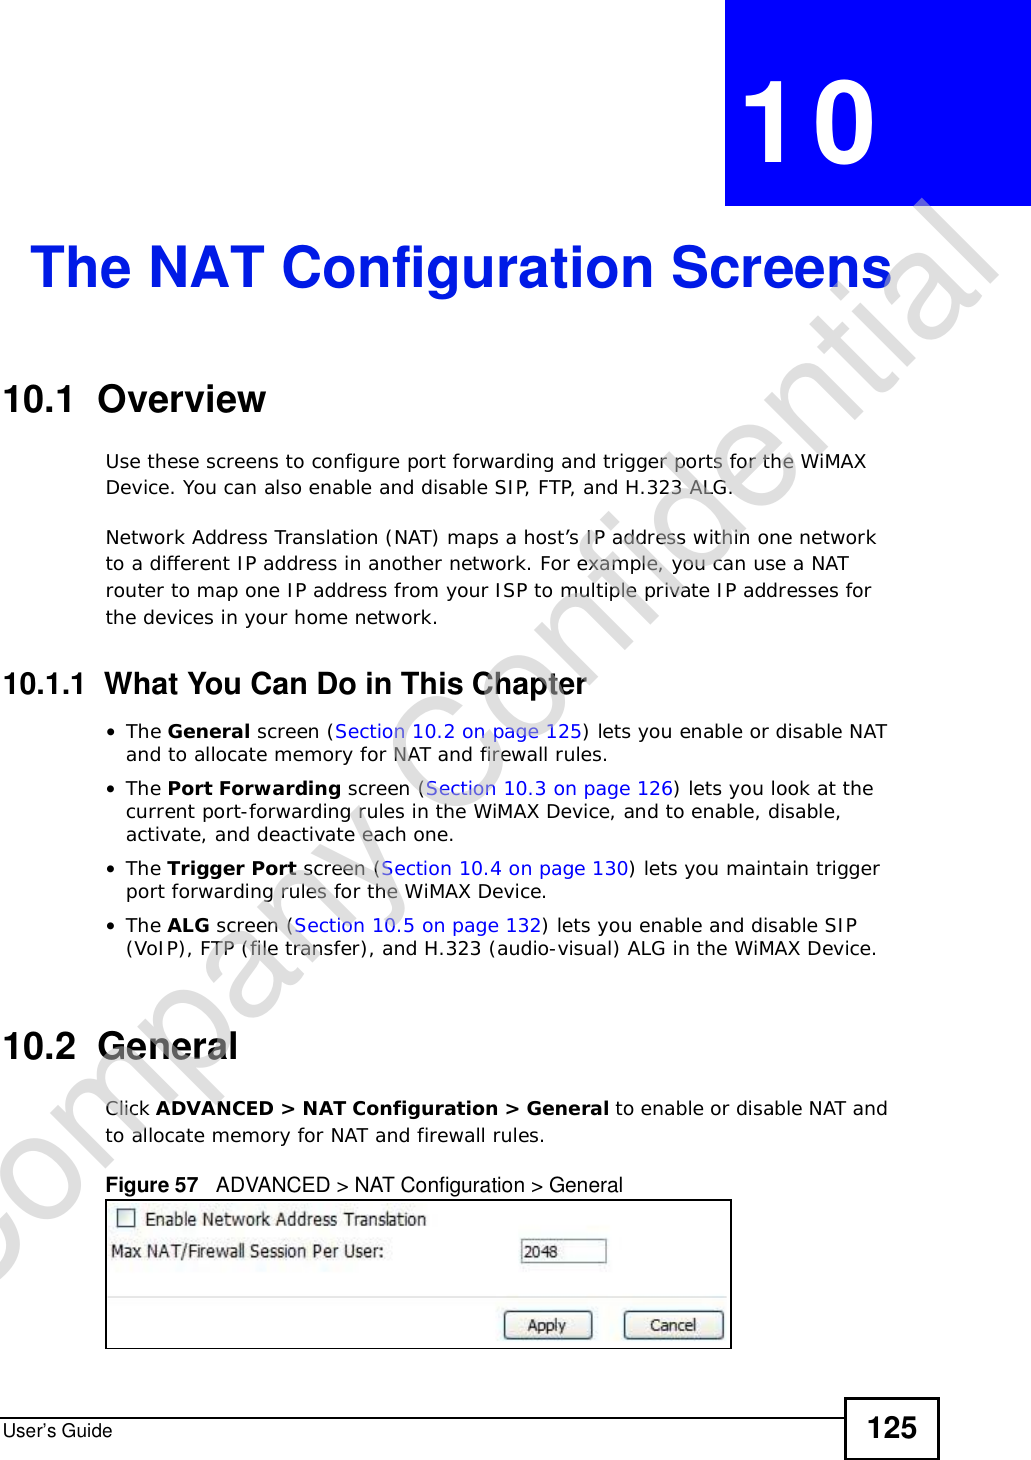 User’s Guide 125CHAPTER 10The NAT Configuration Screens10.1  OverviewUse these screens to configure port forwarding and trigger ports for the WiMAX Device. You can also enable and disable SIP, FTP, and H.323 ALG.Network Address Translation (NAT) maps a host’s IP address within one network to a different IP address in another network. For example, you can use a NAT router to map one IP address from your ISP to multiple private IP addresses for the devices in your home network.10.1.1  What You Can Do in This Chapter•The General screen (Section 10.2 on page 125) lets you enable or disable NAT and to allocate memory for NAT and firewall rules.•The Port Forwarding screen (Section 10.3 on page 126) lets you look at the current port-forwarding rules in the WiMAX Device, and to enable, disable, activate, and deactivate each one.•The Trigger Port screen (Section 10.4 on page 130) lets you maintain trigger port forwarding rules for the WiMAX Device.•The ALG screen (Section 10.5 on page 132) lets you enable and disable SIP (VoIP), FTP (file transfer), and H.323 (audio-visual) ALG in the WiMAX Device.10.2  GeneralClick ADVANCED &gt; NAT Configuration &gt; General to enable or disable NAT and to allocate memory for NAT and firewall rules.Figure 57   ADVANCED &gt; NAT Configuration &gt; GeneralCompany Confidential